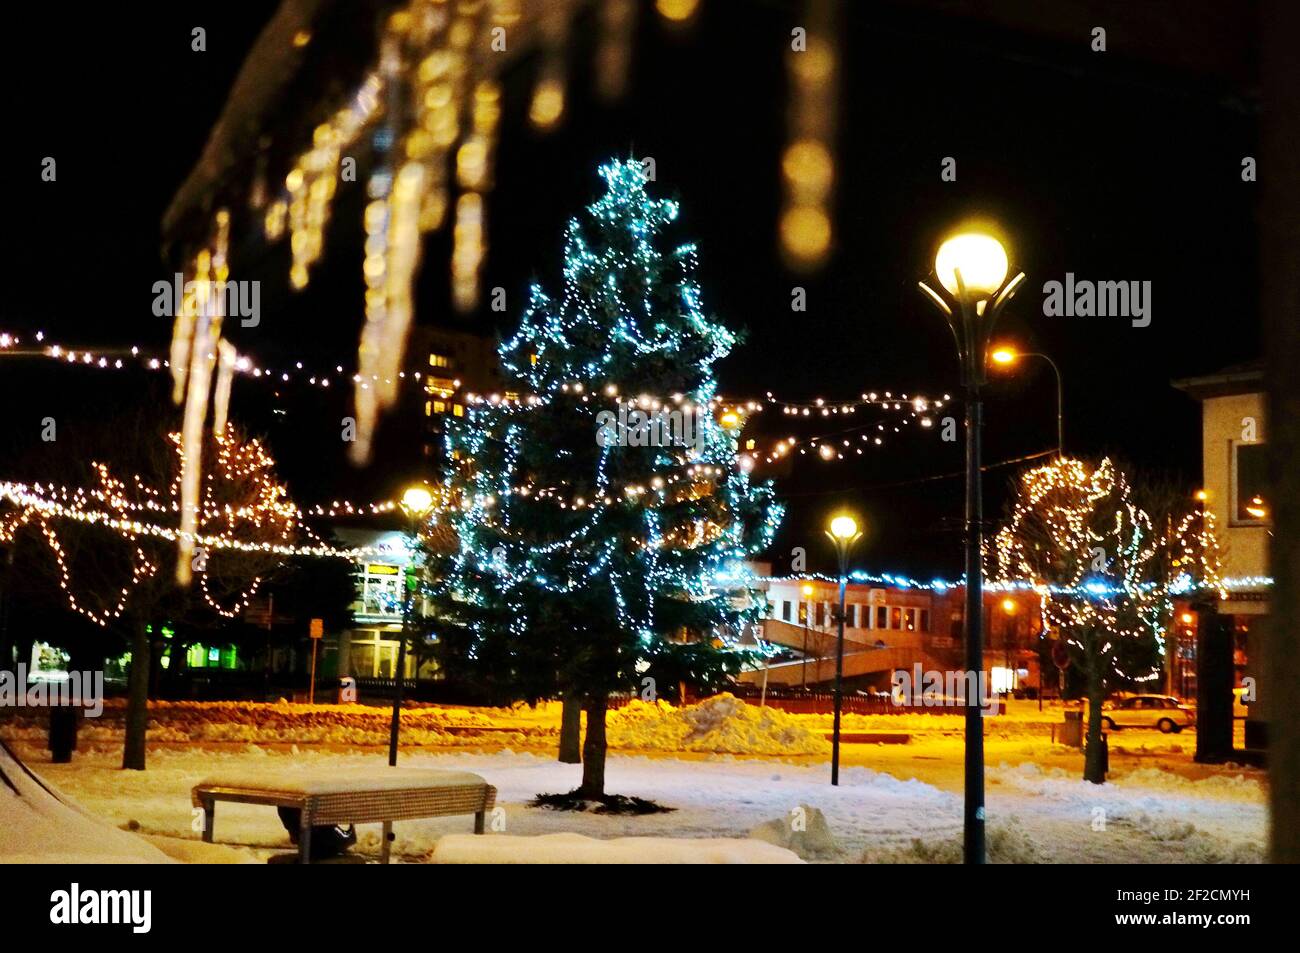 Picture of a beautiful Christmas tree and Christmas lights in the snowy square of a Slovak town Myjava with blurred illuminated icicles in the foregro Stock Photo